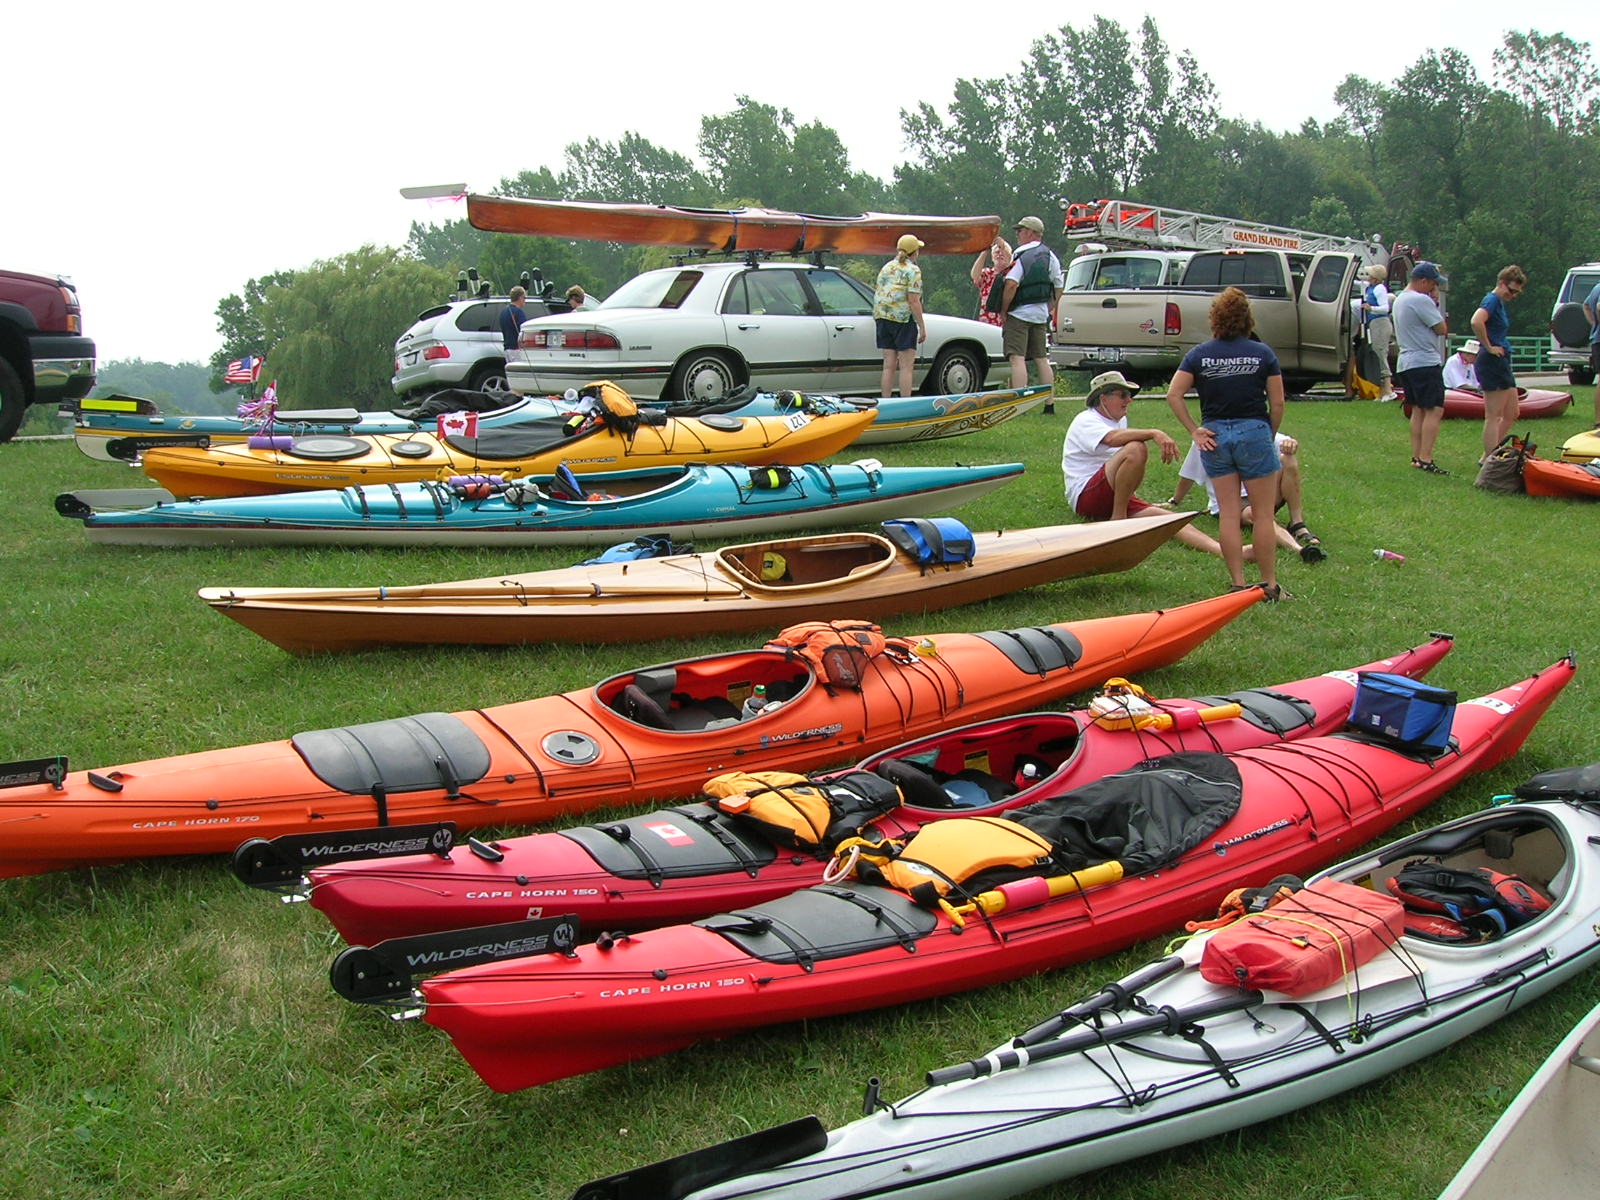 There are lots of paddlers on America's waterways